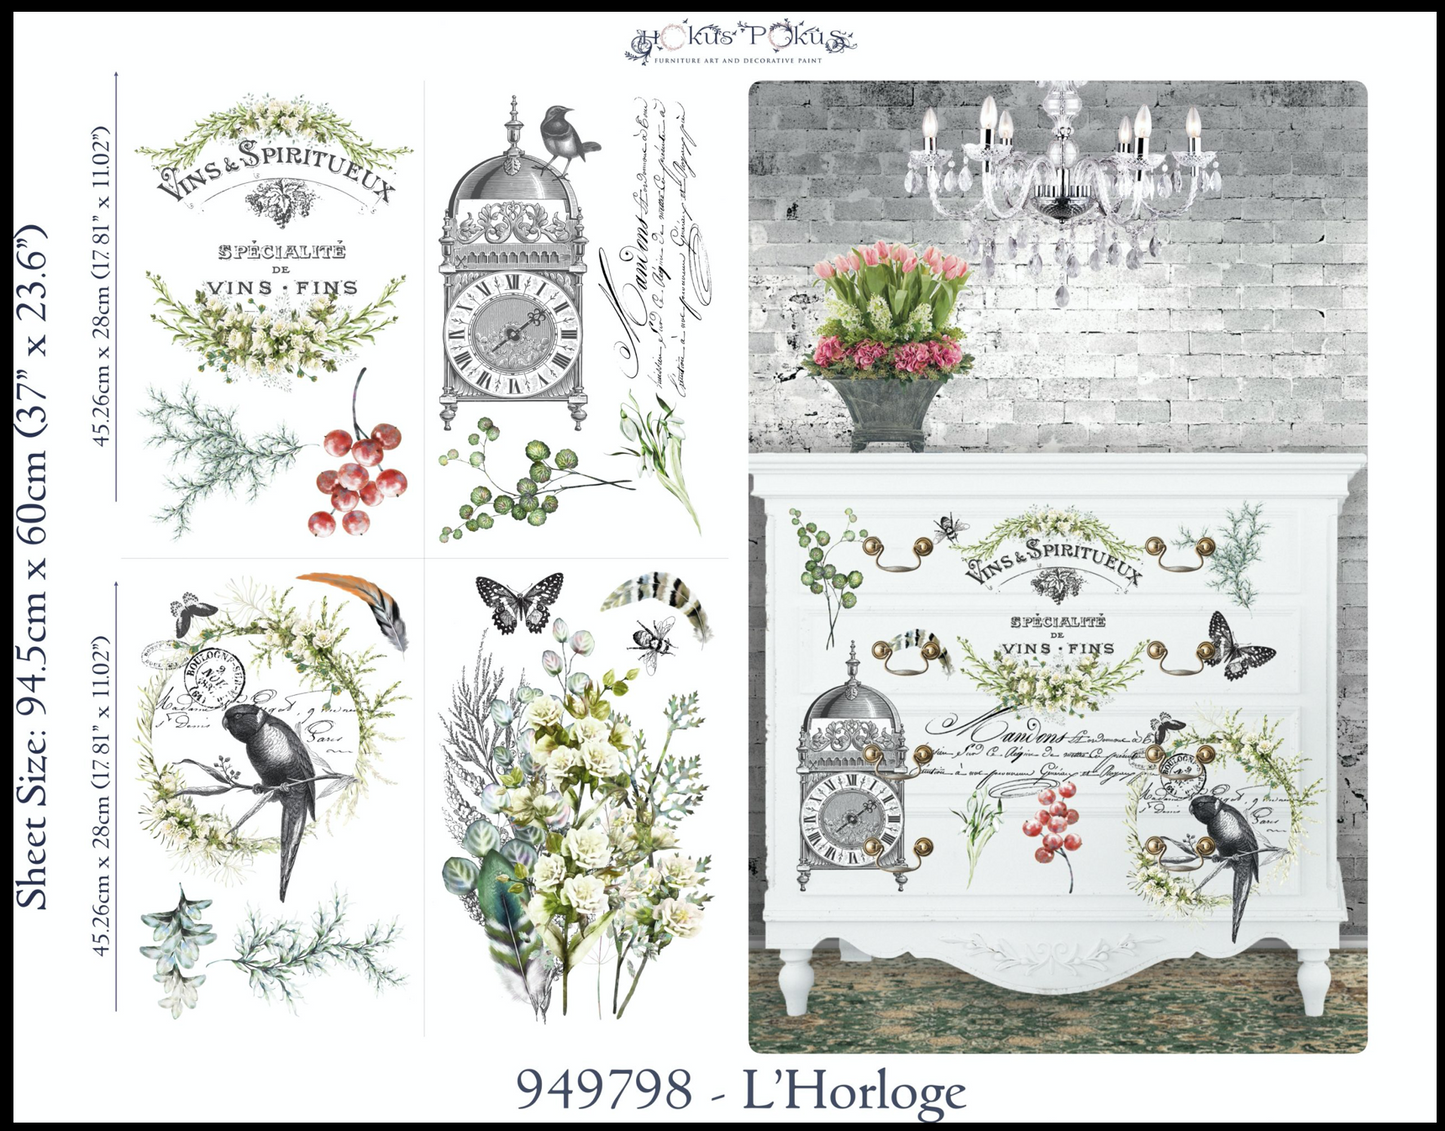 Green, White, Black and Grey Colored Furniture Image Transfer; with parrot bird, grandfather clock, and floral bouquet